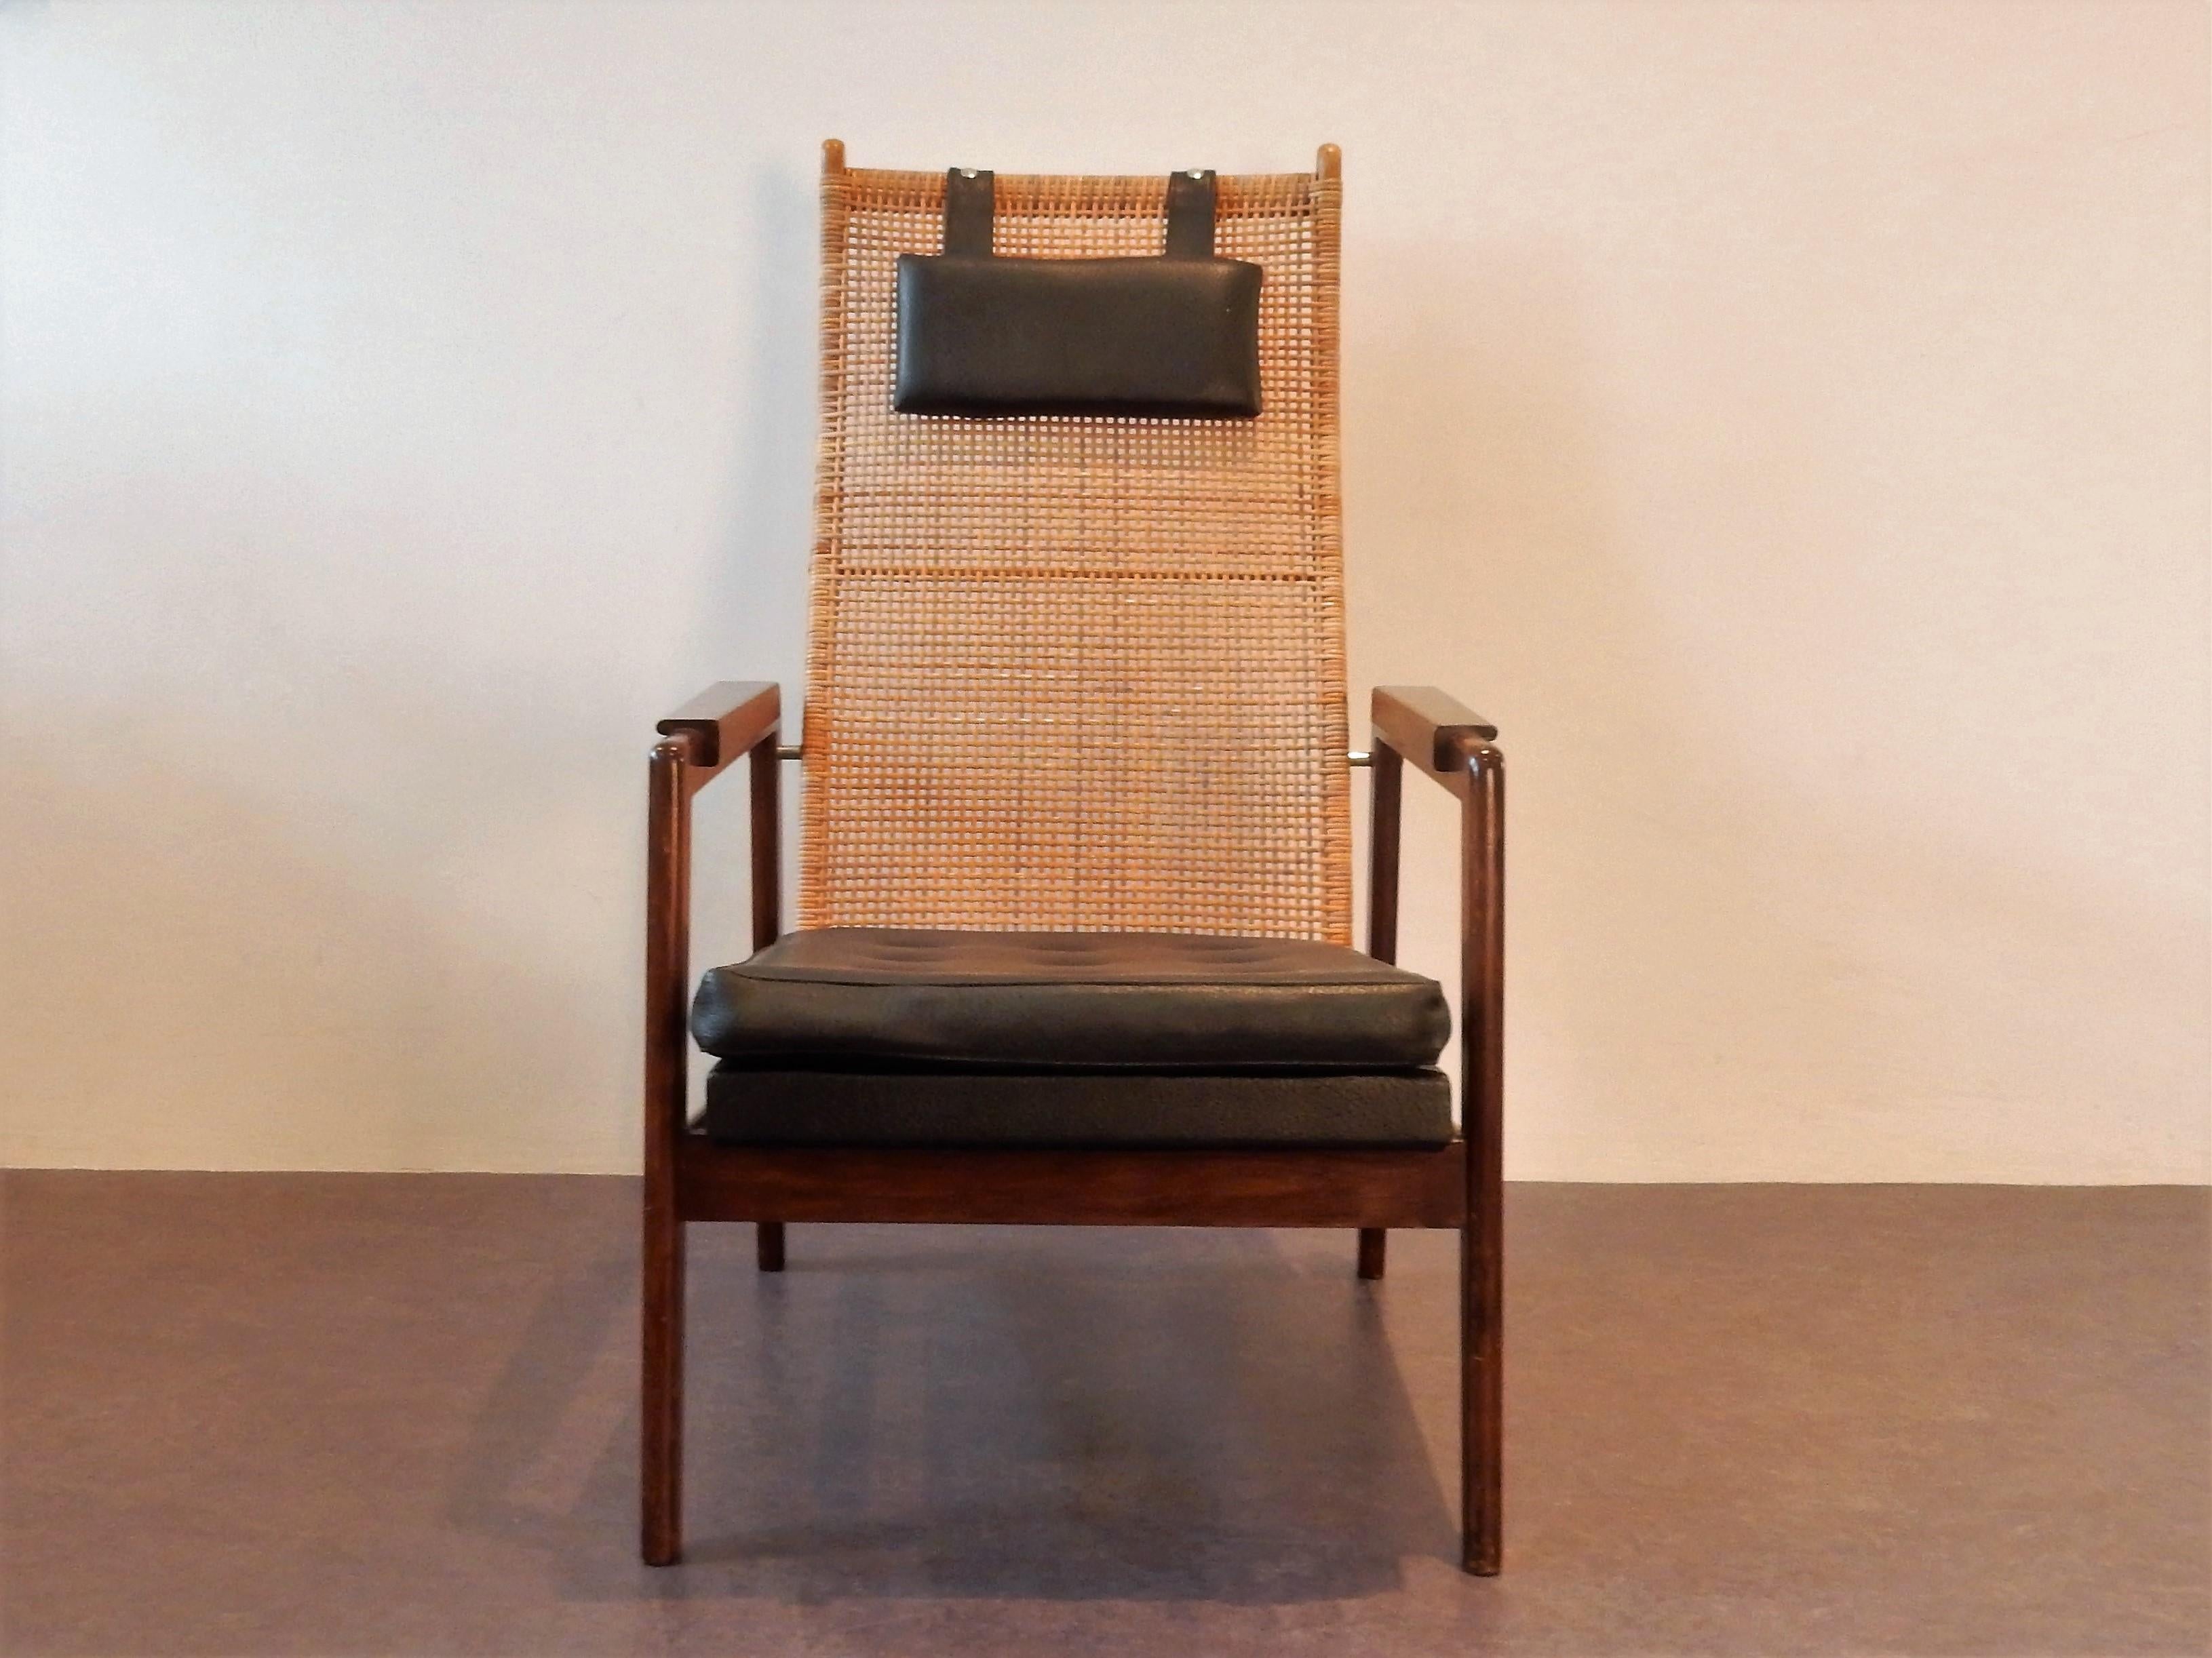 This lounge chair was designed by P.J. Muntendam for Gebroeders Jonkers or in English, the Jonkers brothers. The Jonkers brothers were famous for their rattan chairs and furniture. This chair has a webbed cane backrest, vinyl leather cushions all in